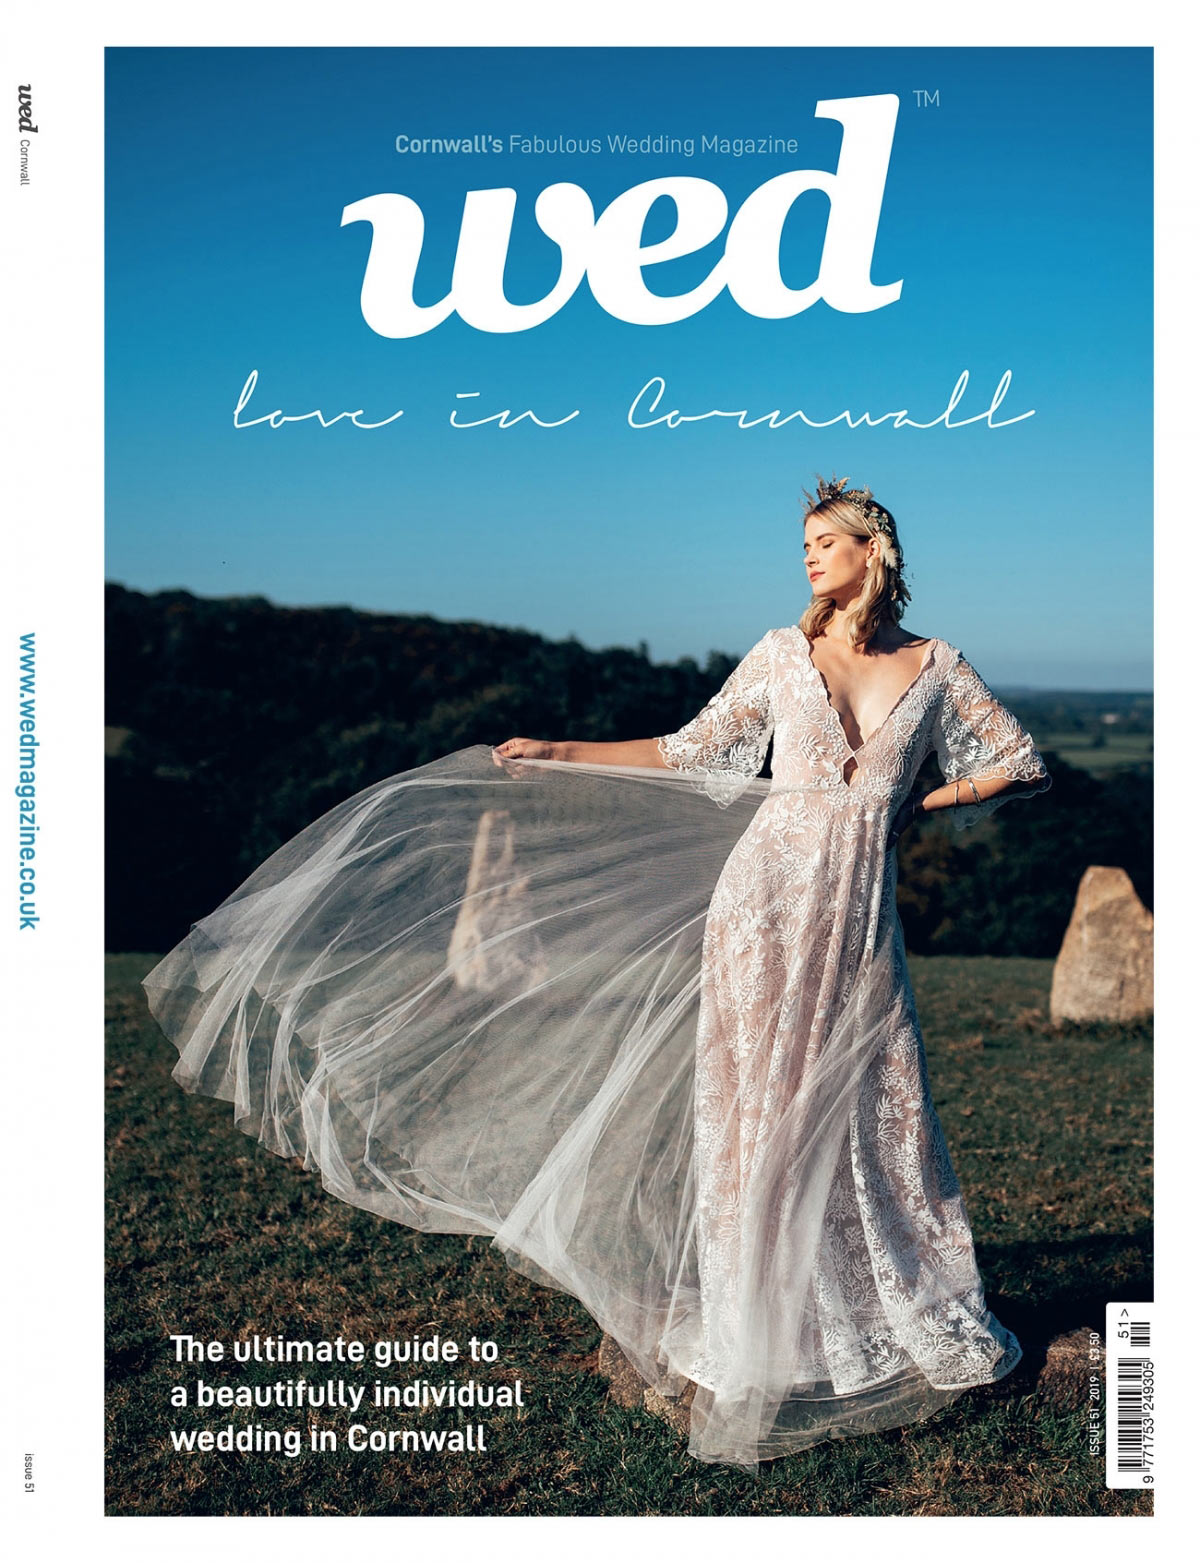 Bumper new Cornwall issue out now!